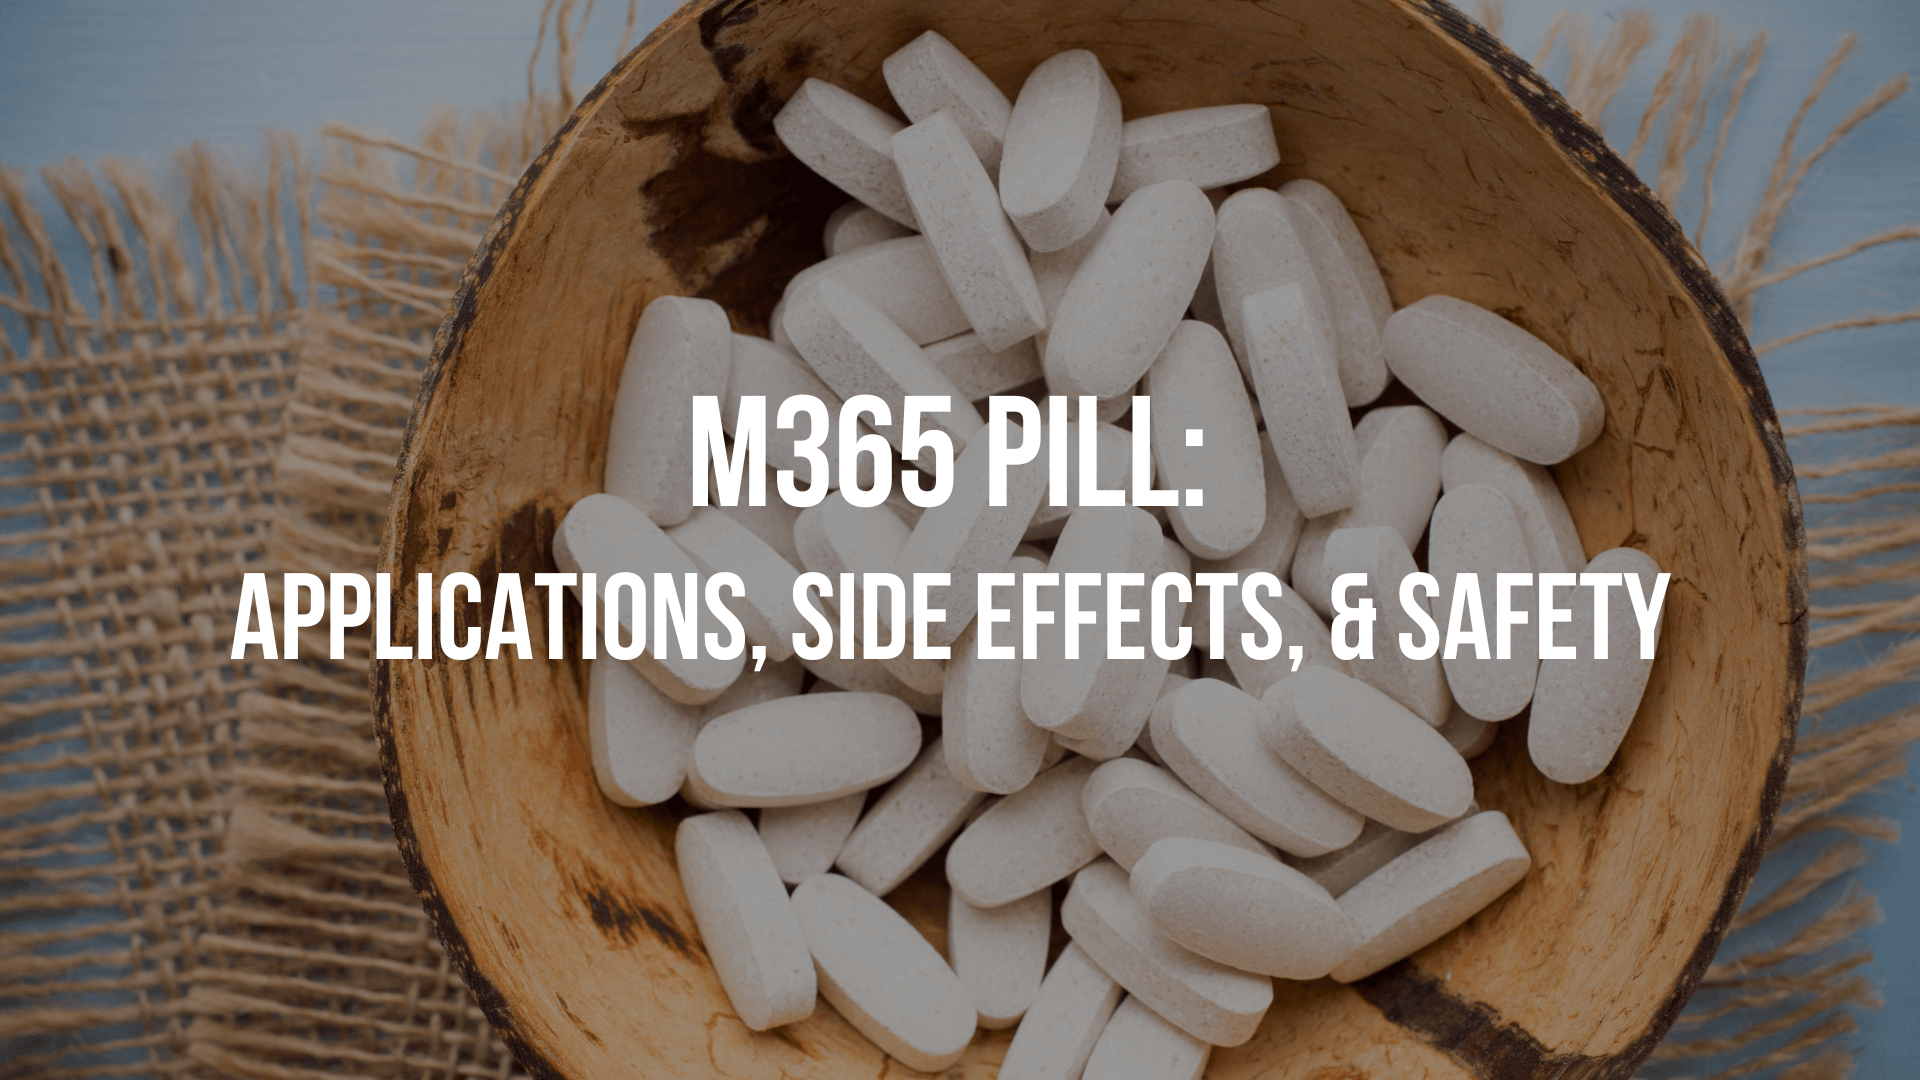 M365 Pill Applications, Side Effects, and Safety